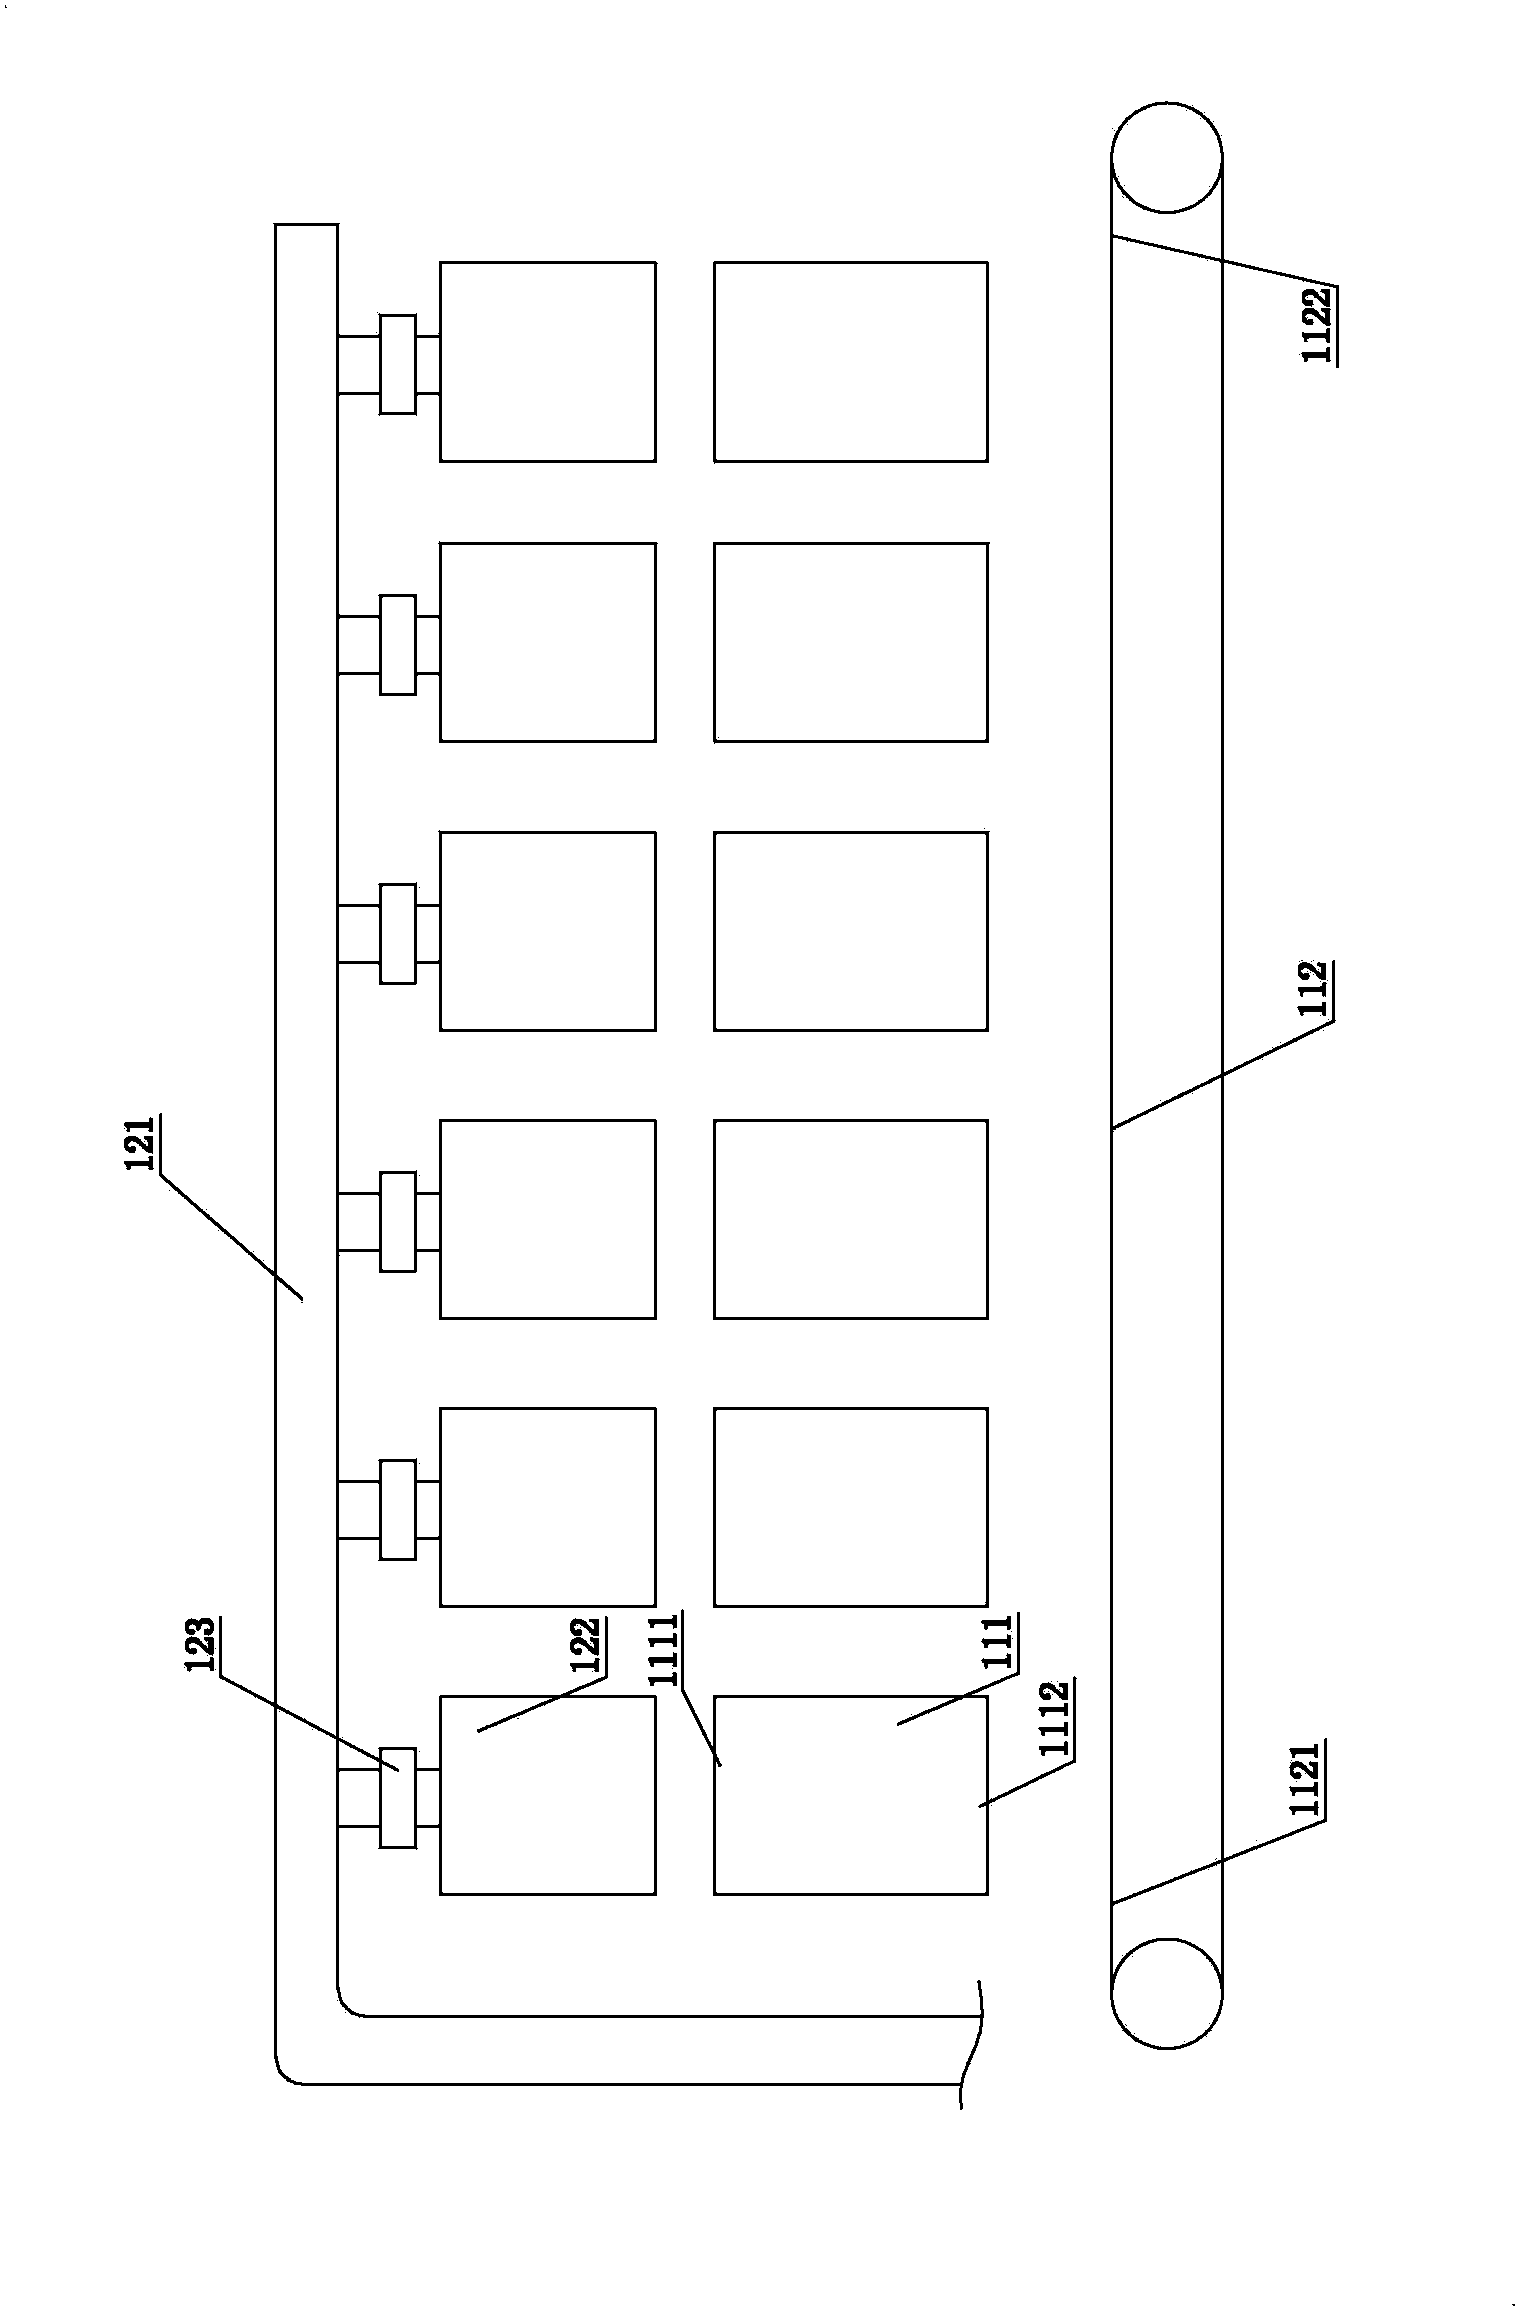 Multistage dispensing equipment applied to production of regenerative polypropylene